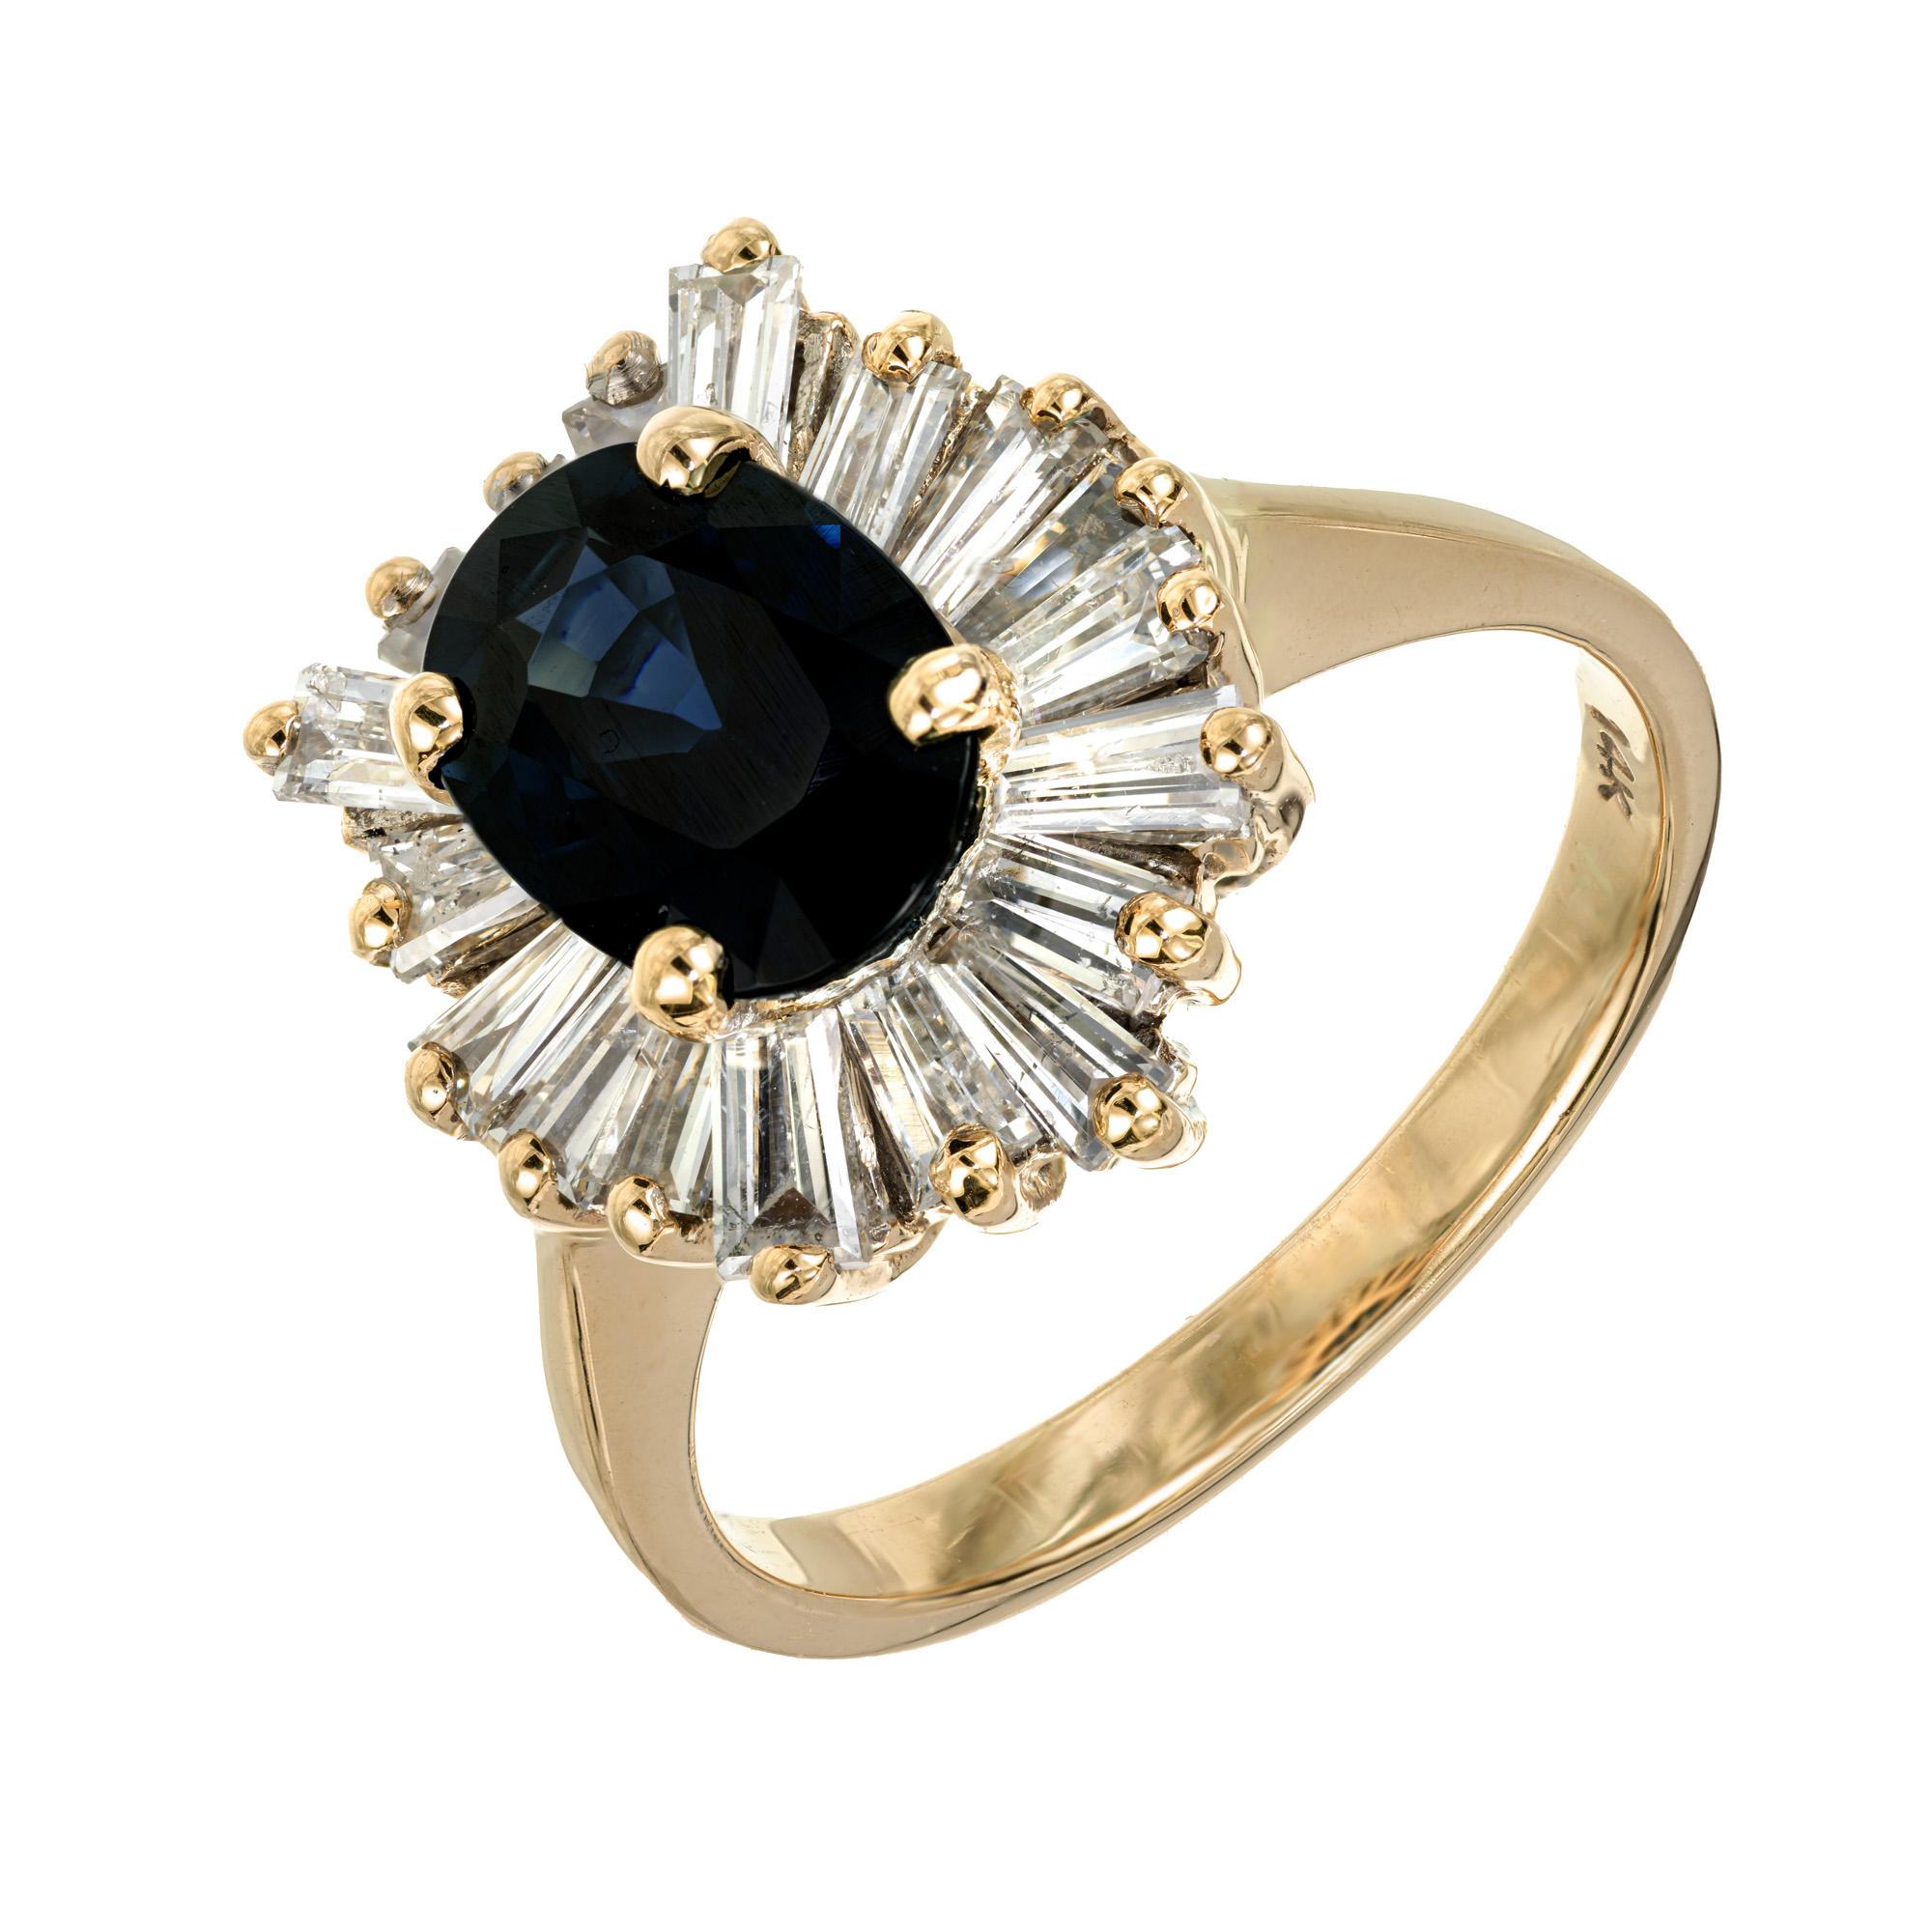 Vintage 1960's sapphire and diamond ballerina engagement ring. This deep blue oval 1.70ct sapphire is GIA certified natural, no heat, mounted in a 14k yellow gold setting with a halo of 18 tappered baguette diamonds, totaling 1.20cts.

1 oval blue